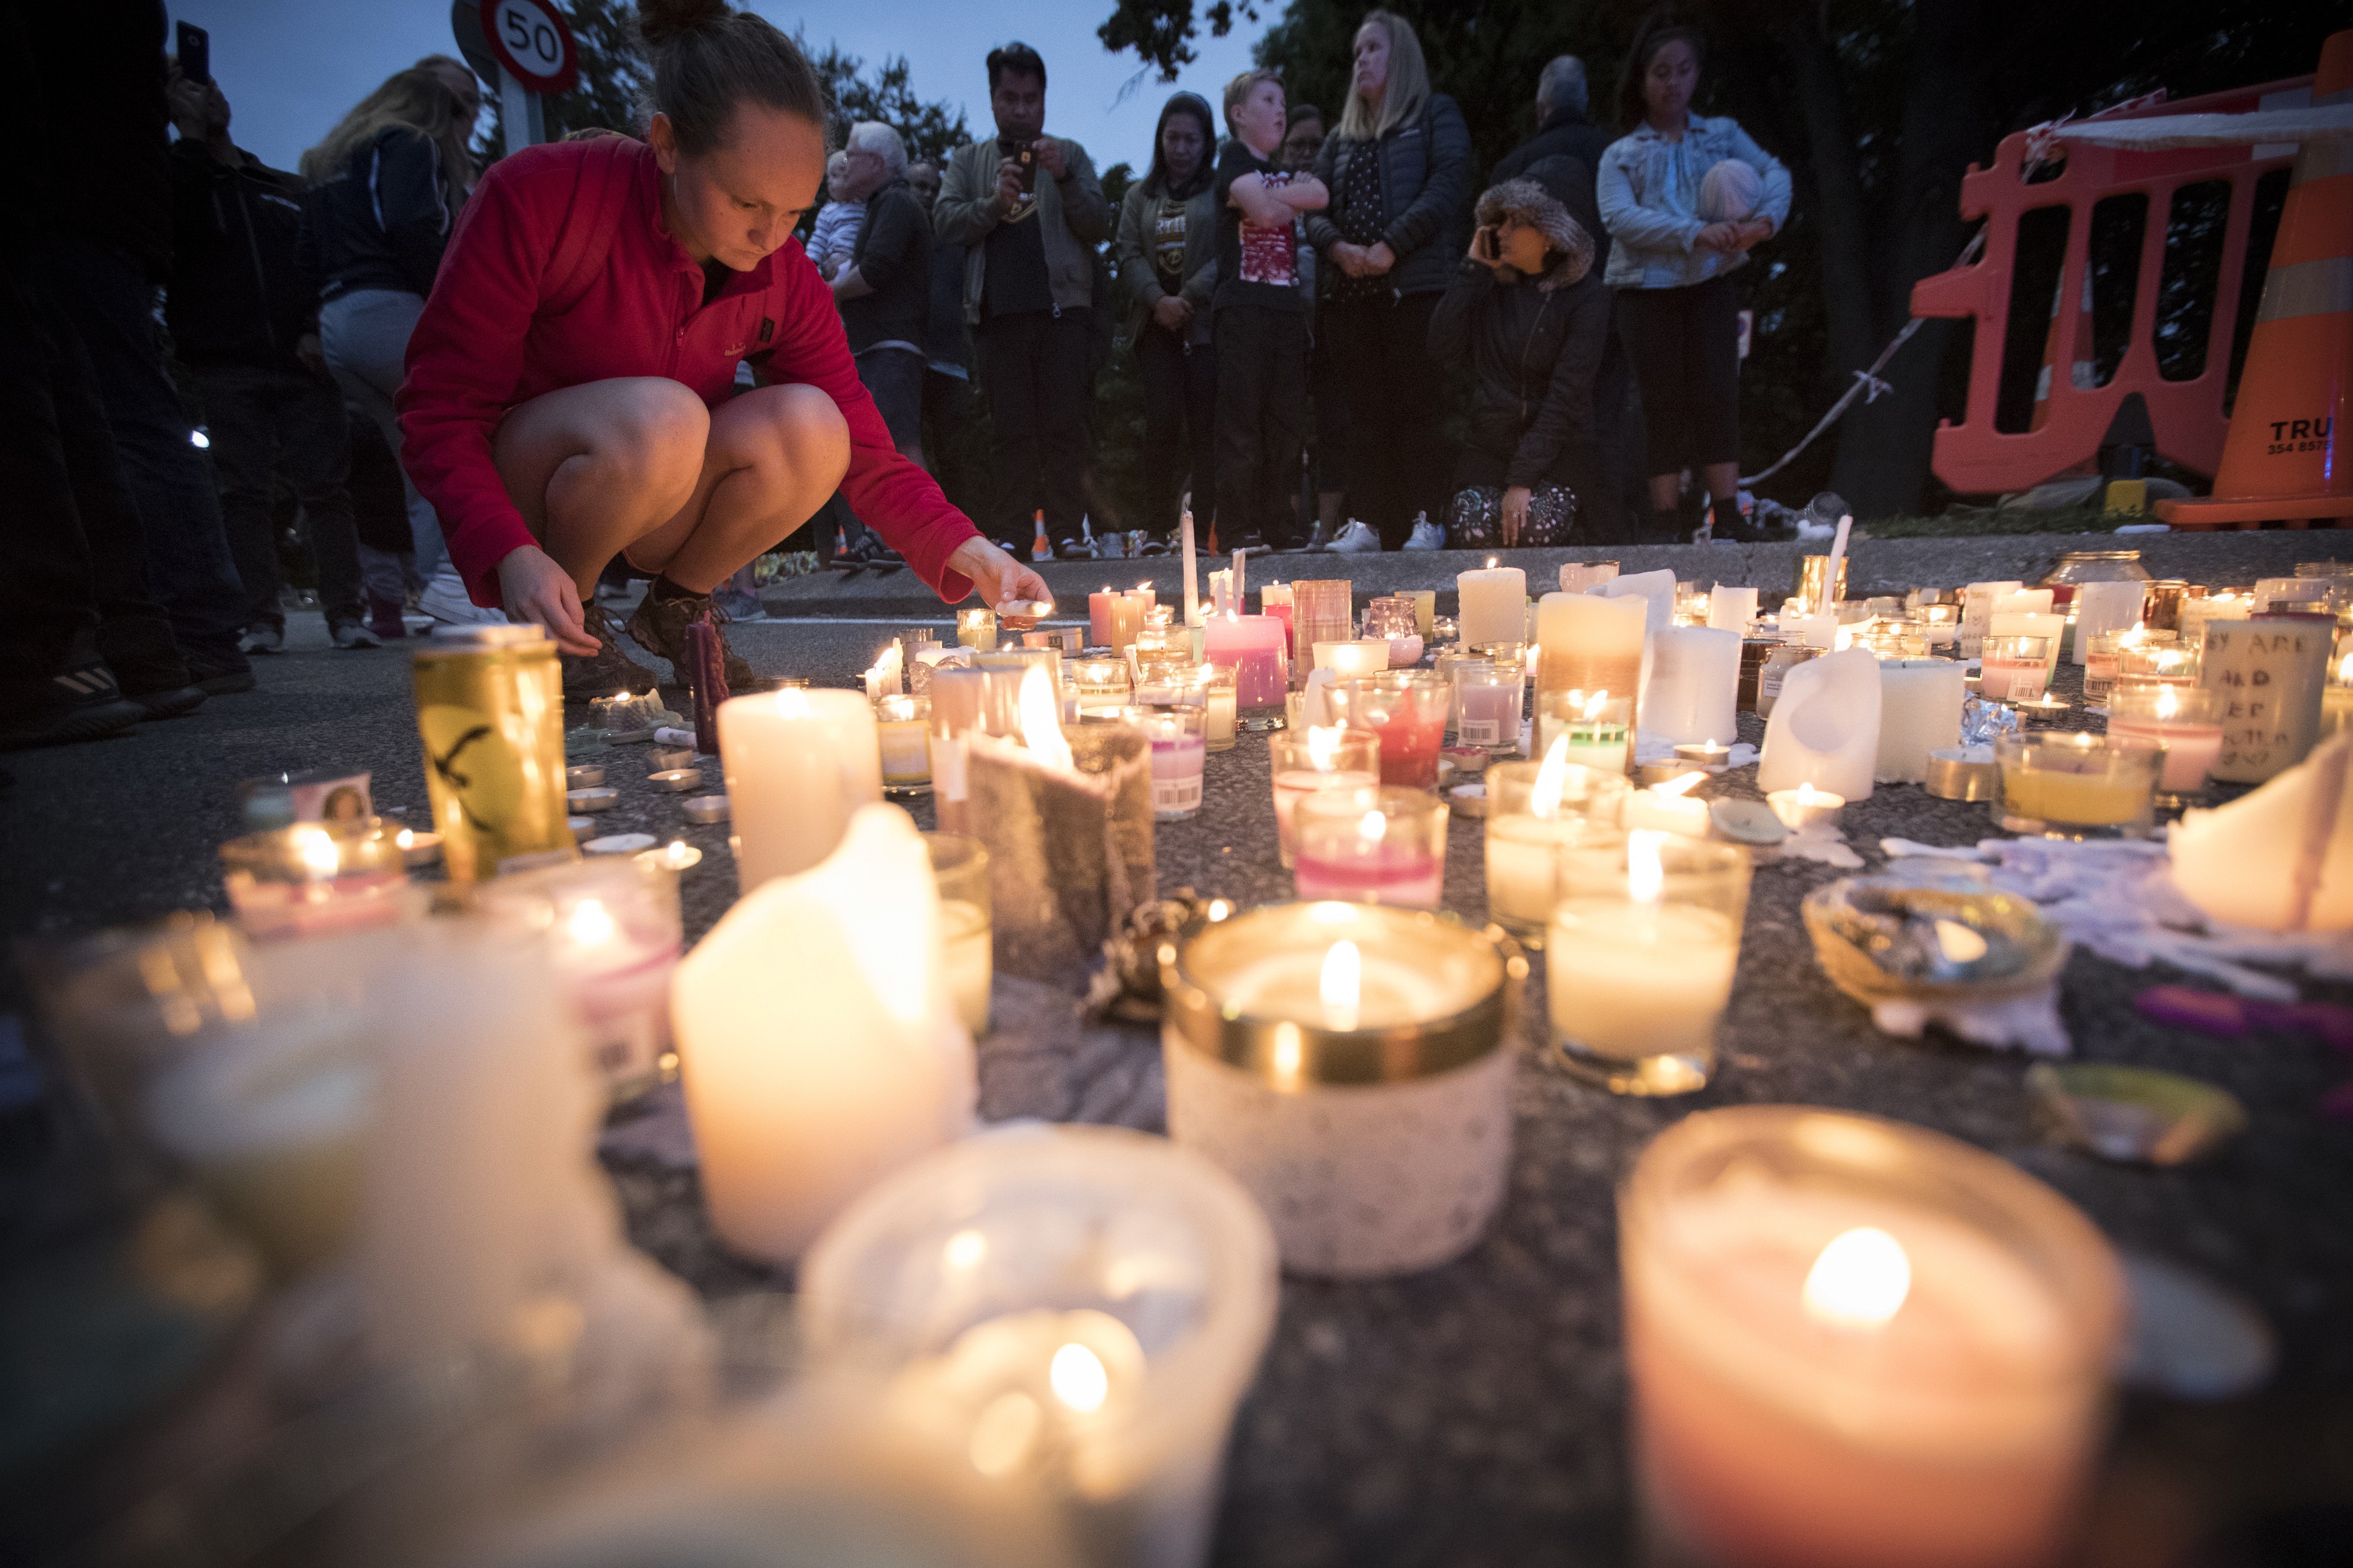 Candles are placed to commemorate victims of the terror attack outside the Al Noor Mosque in Christchurch, New Zealand. Photo: AP Photo